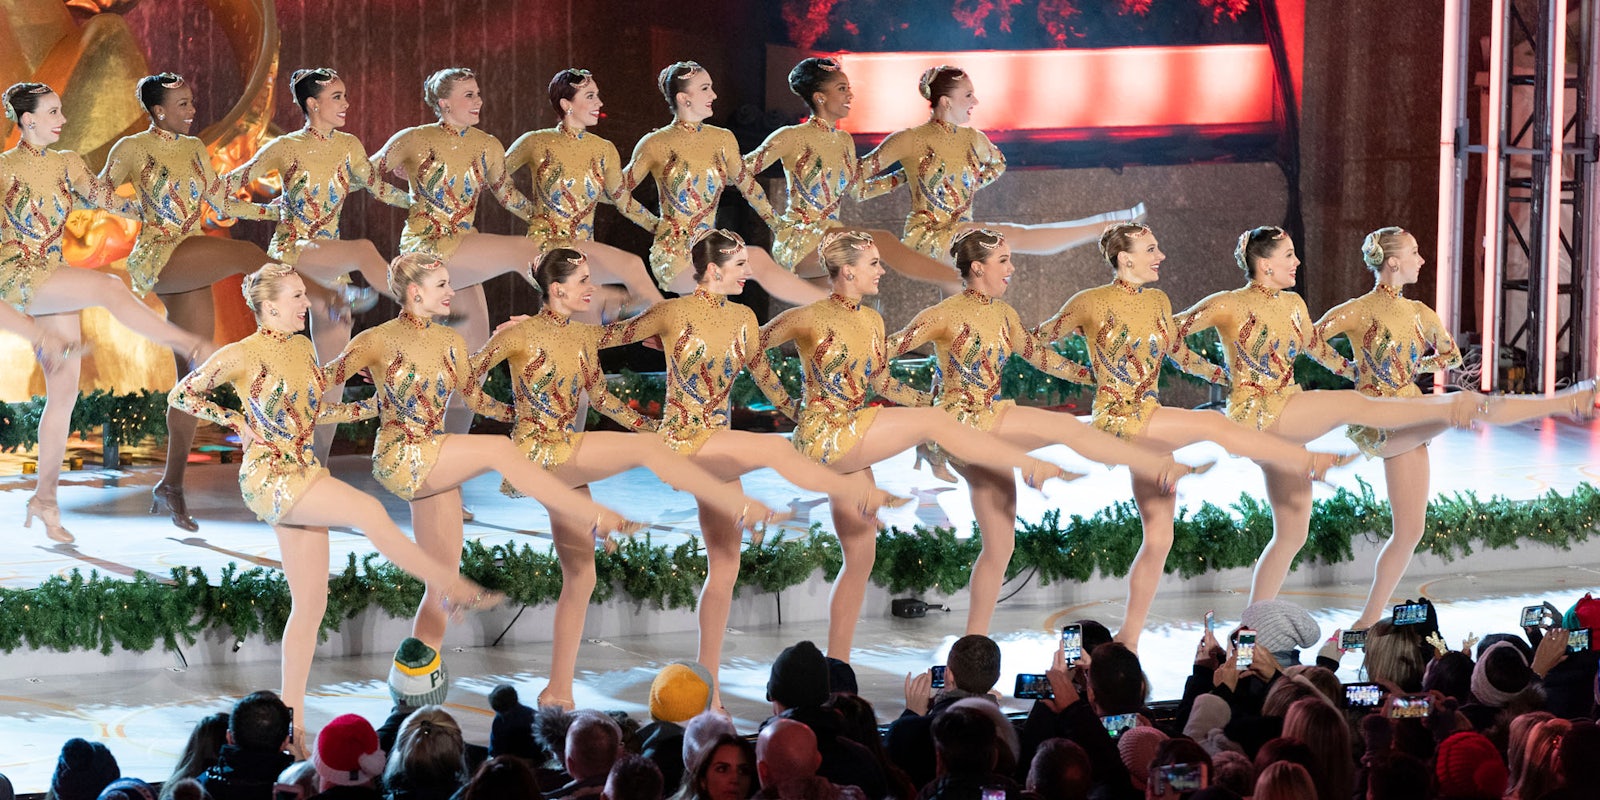 The Rockettes performing in front of crowd